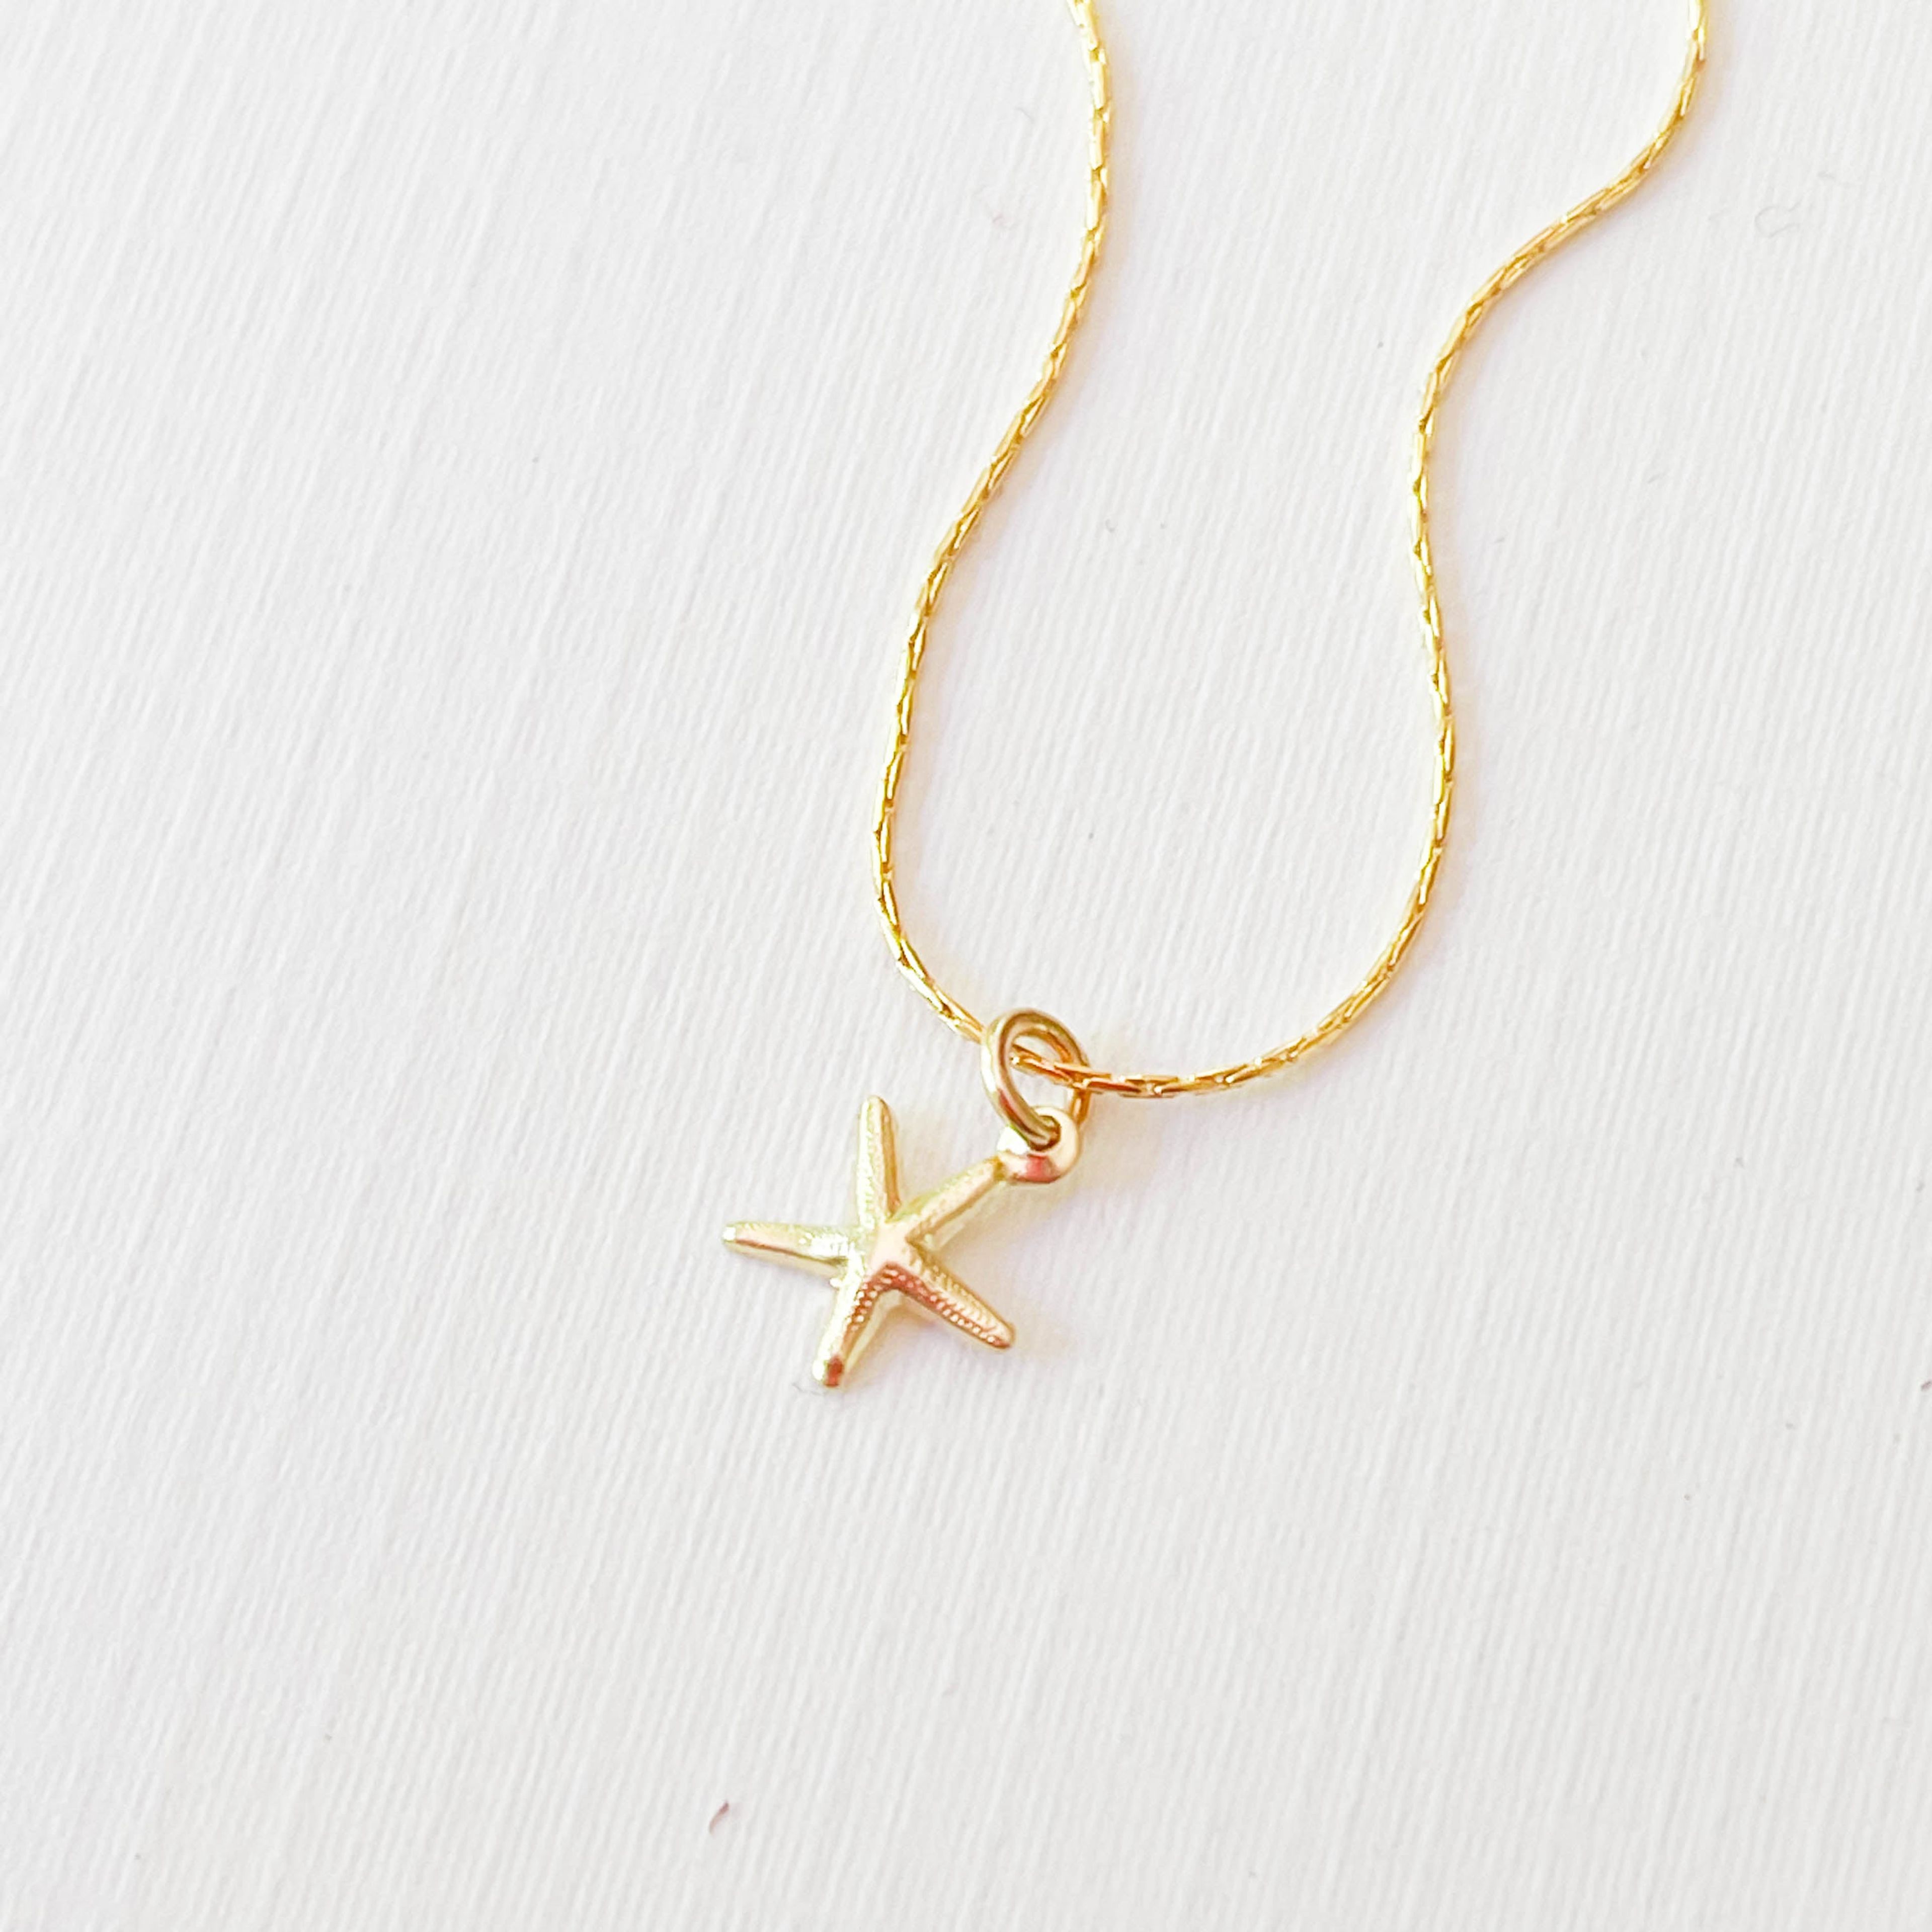 Gold Filled Charm Necklace with a Heart, Starfish or Sun